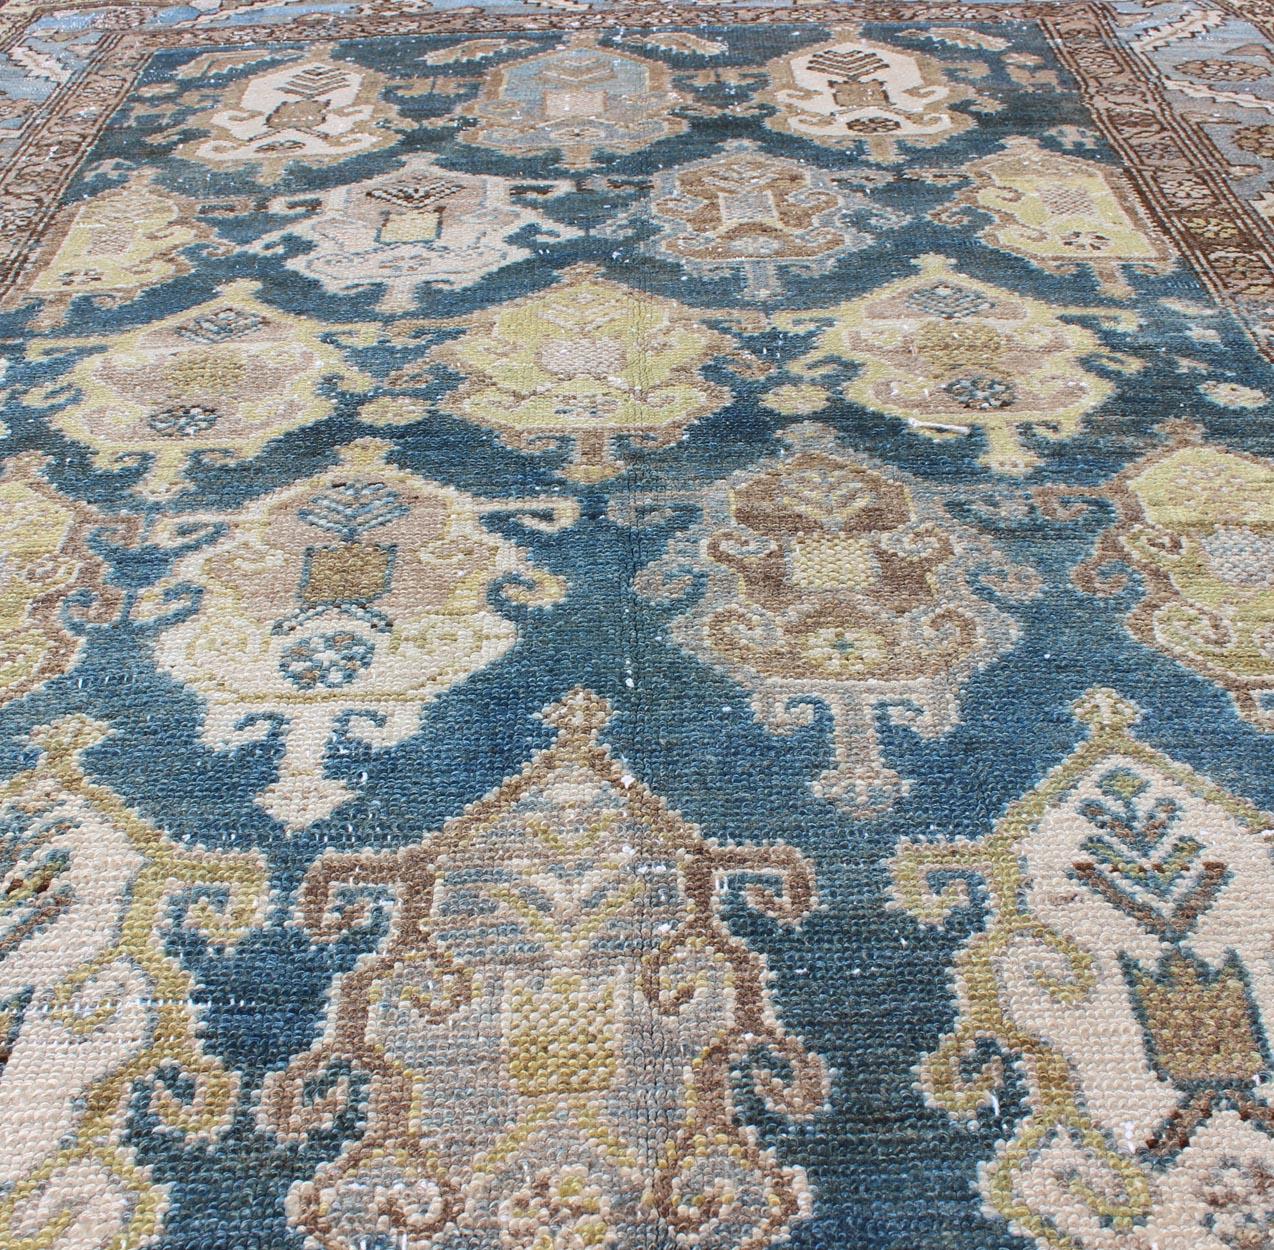 Wool Shades of Blue and Ivory Antique Persian Fine Malayer Rug, Large Scale Design For Sale